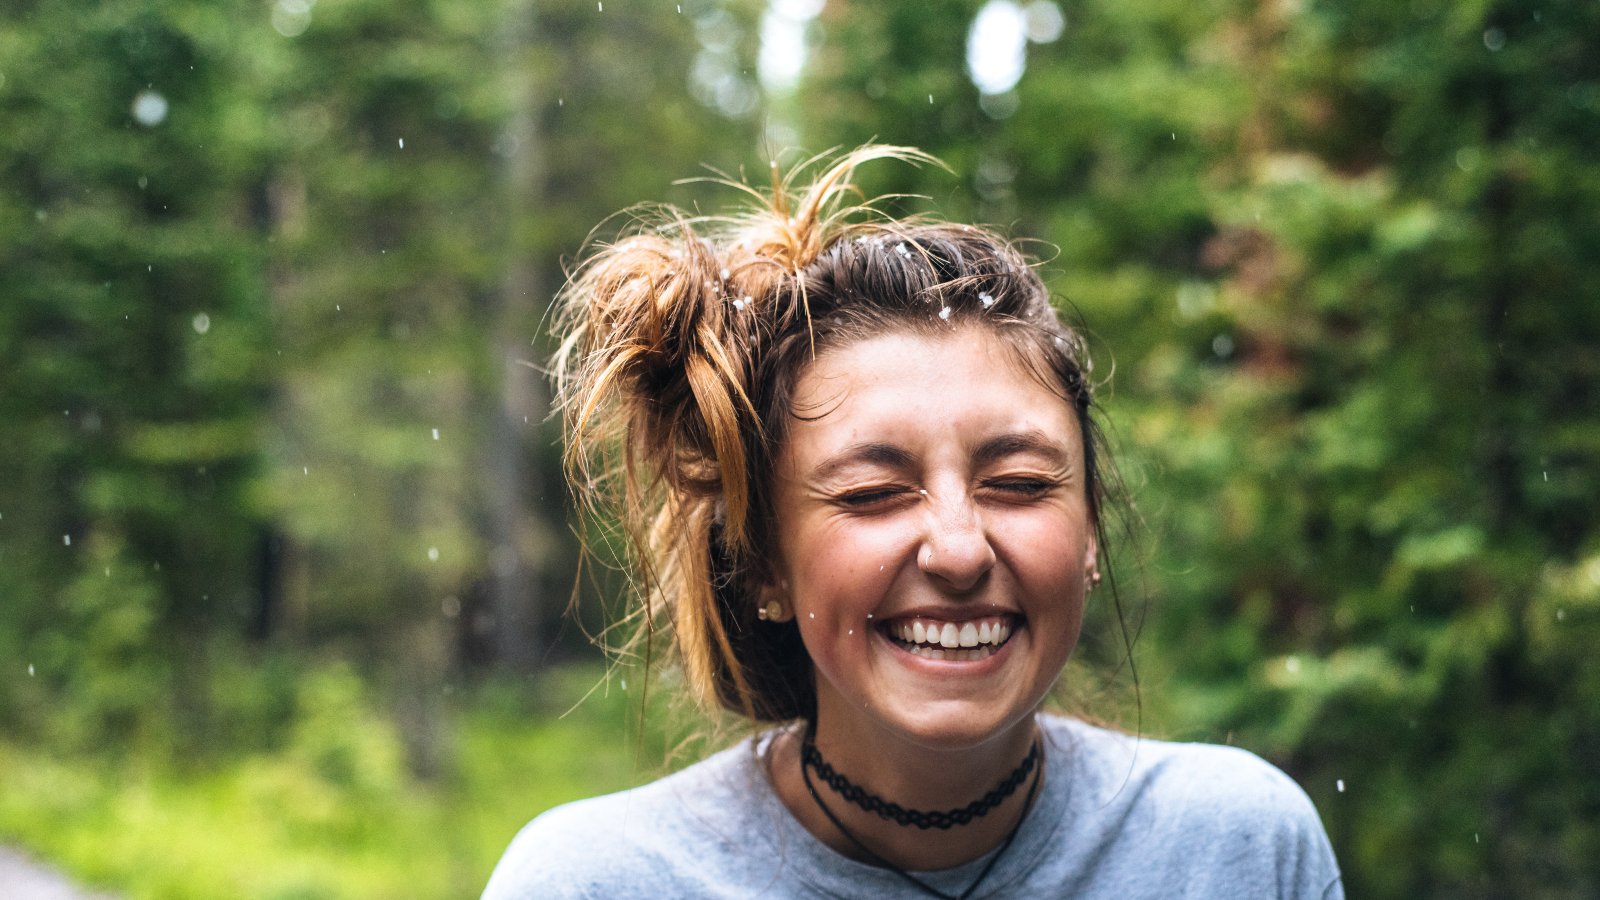 Smiling girl in forest